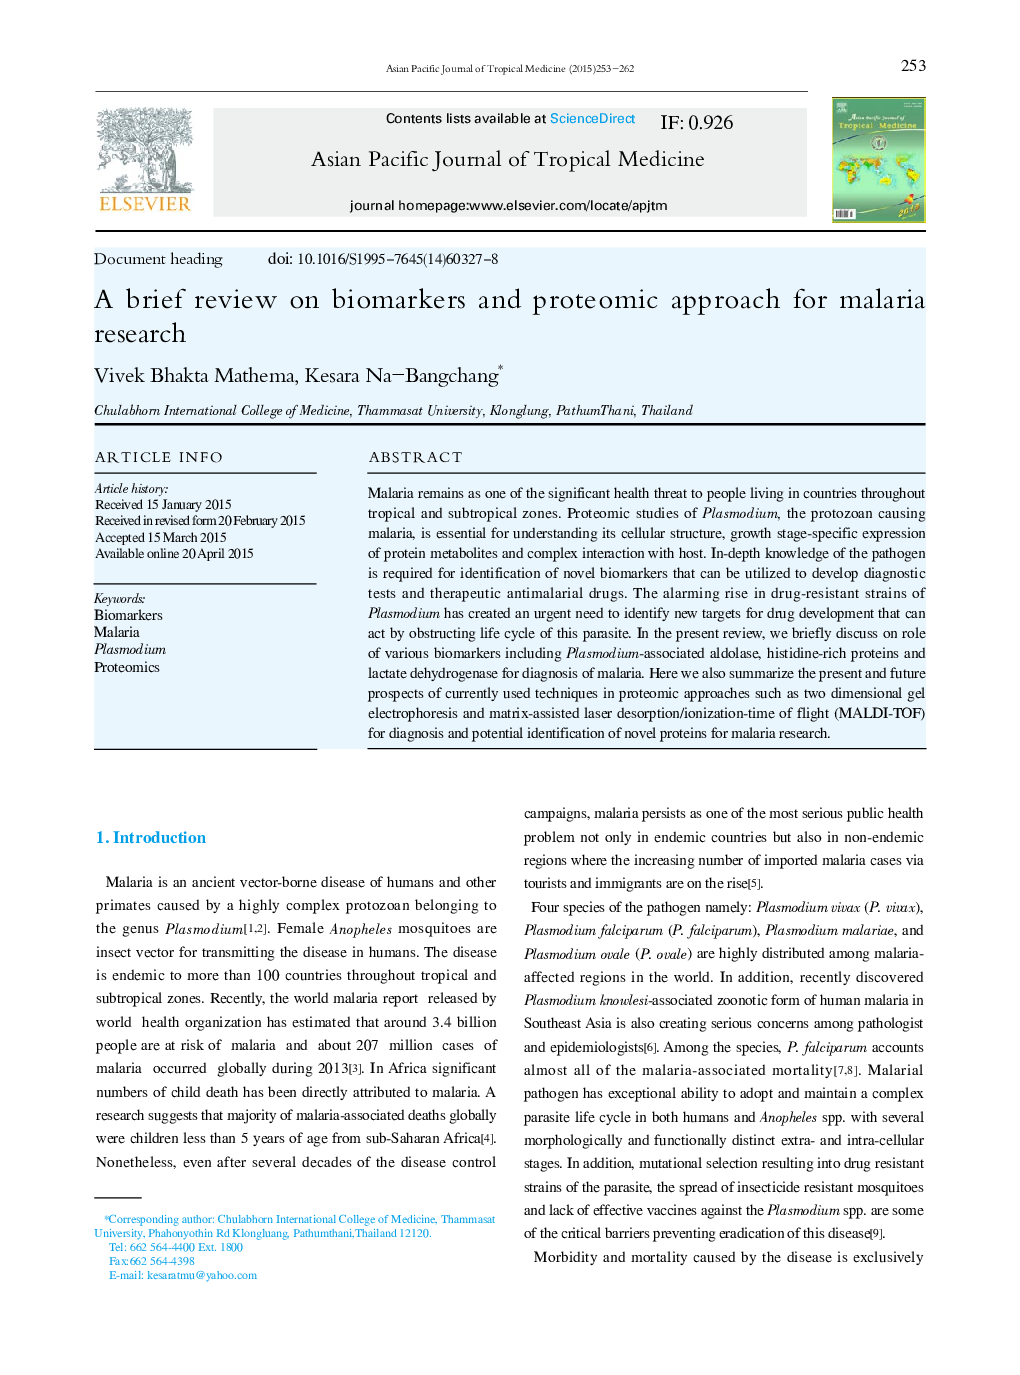 A brief review on biomarkers and proteomic approach for malaria research 